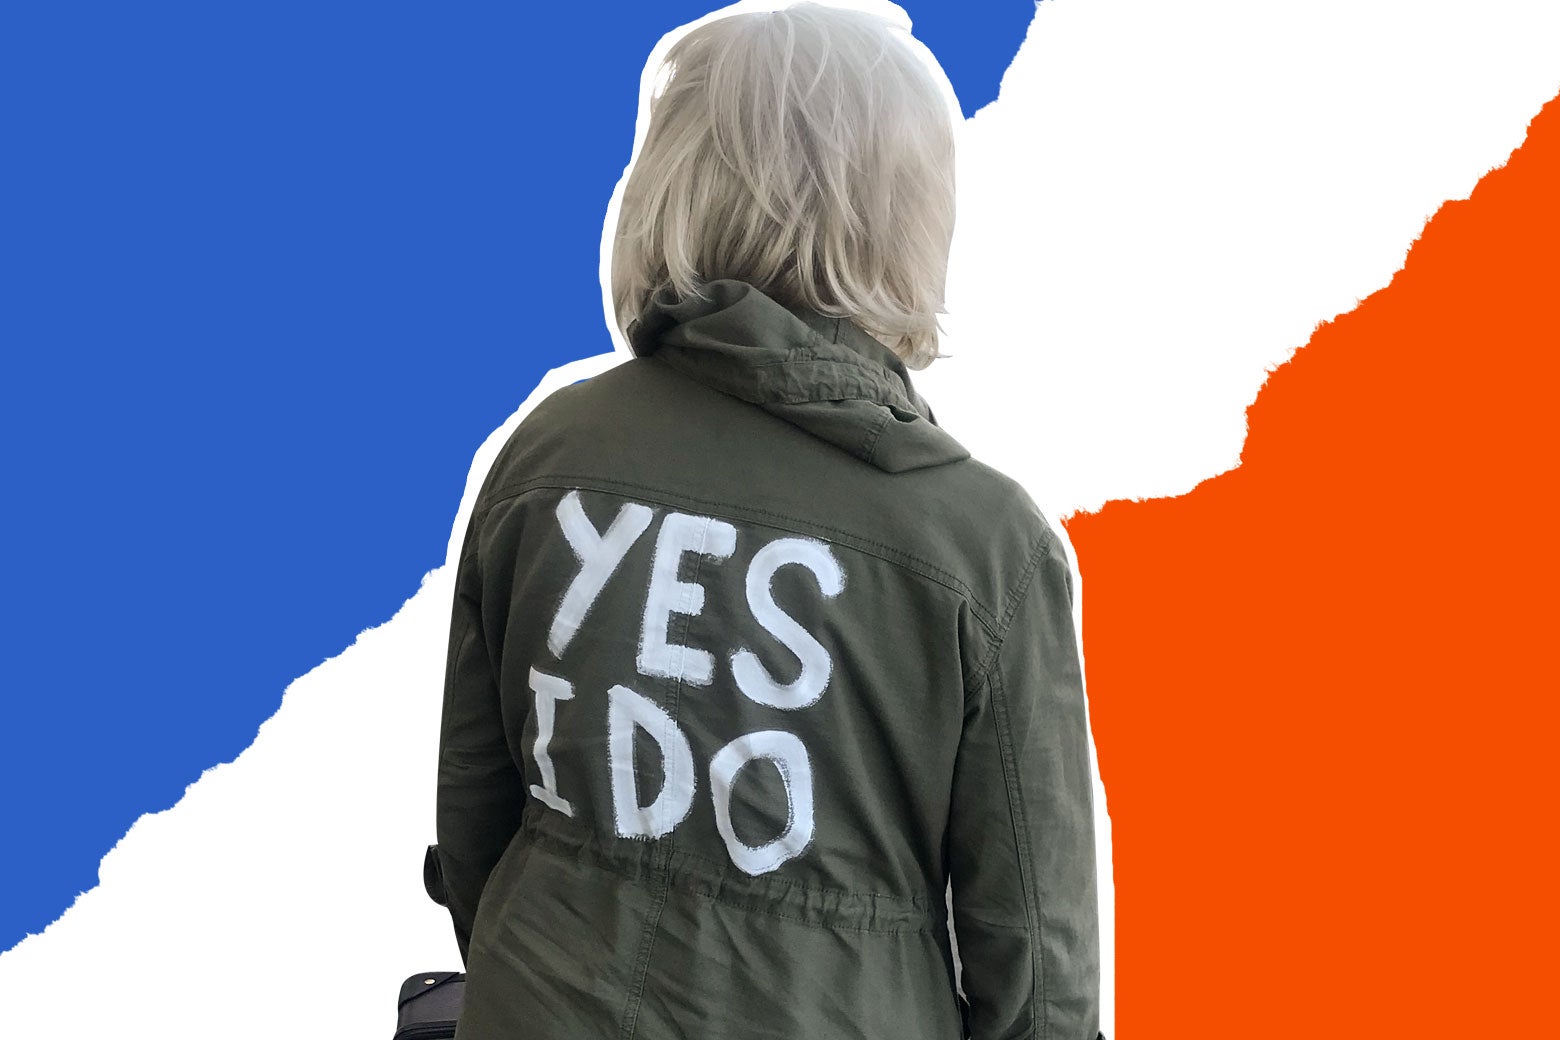 The author in the “YES I DO” jacket that she canvasses in.